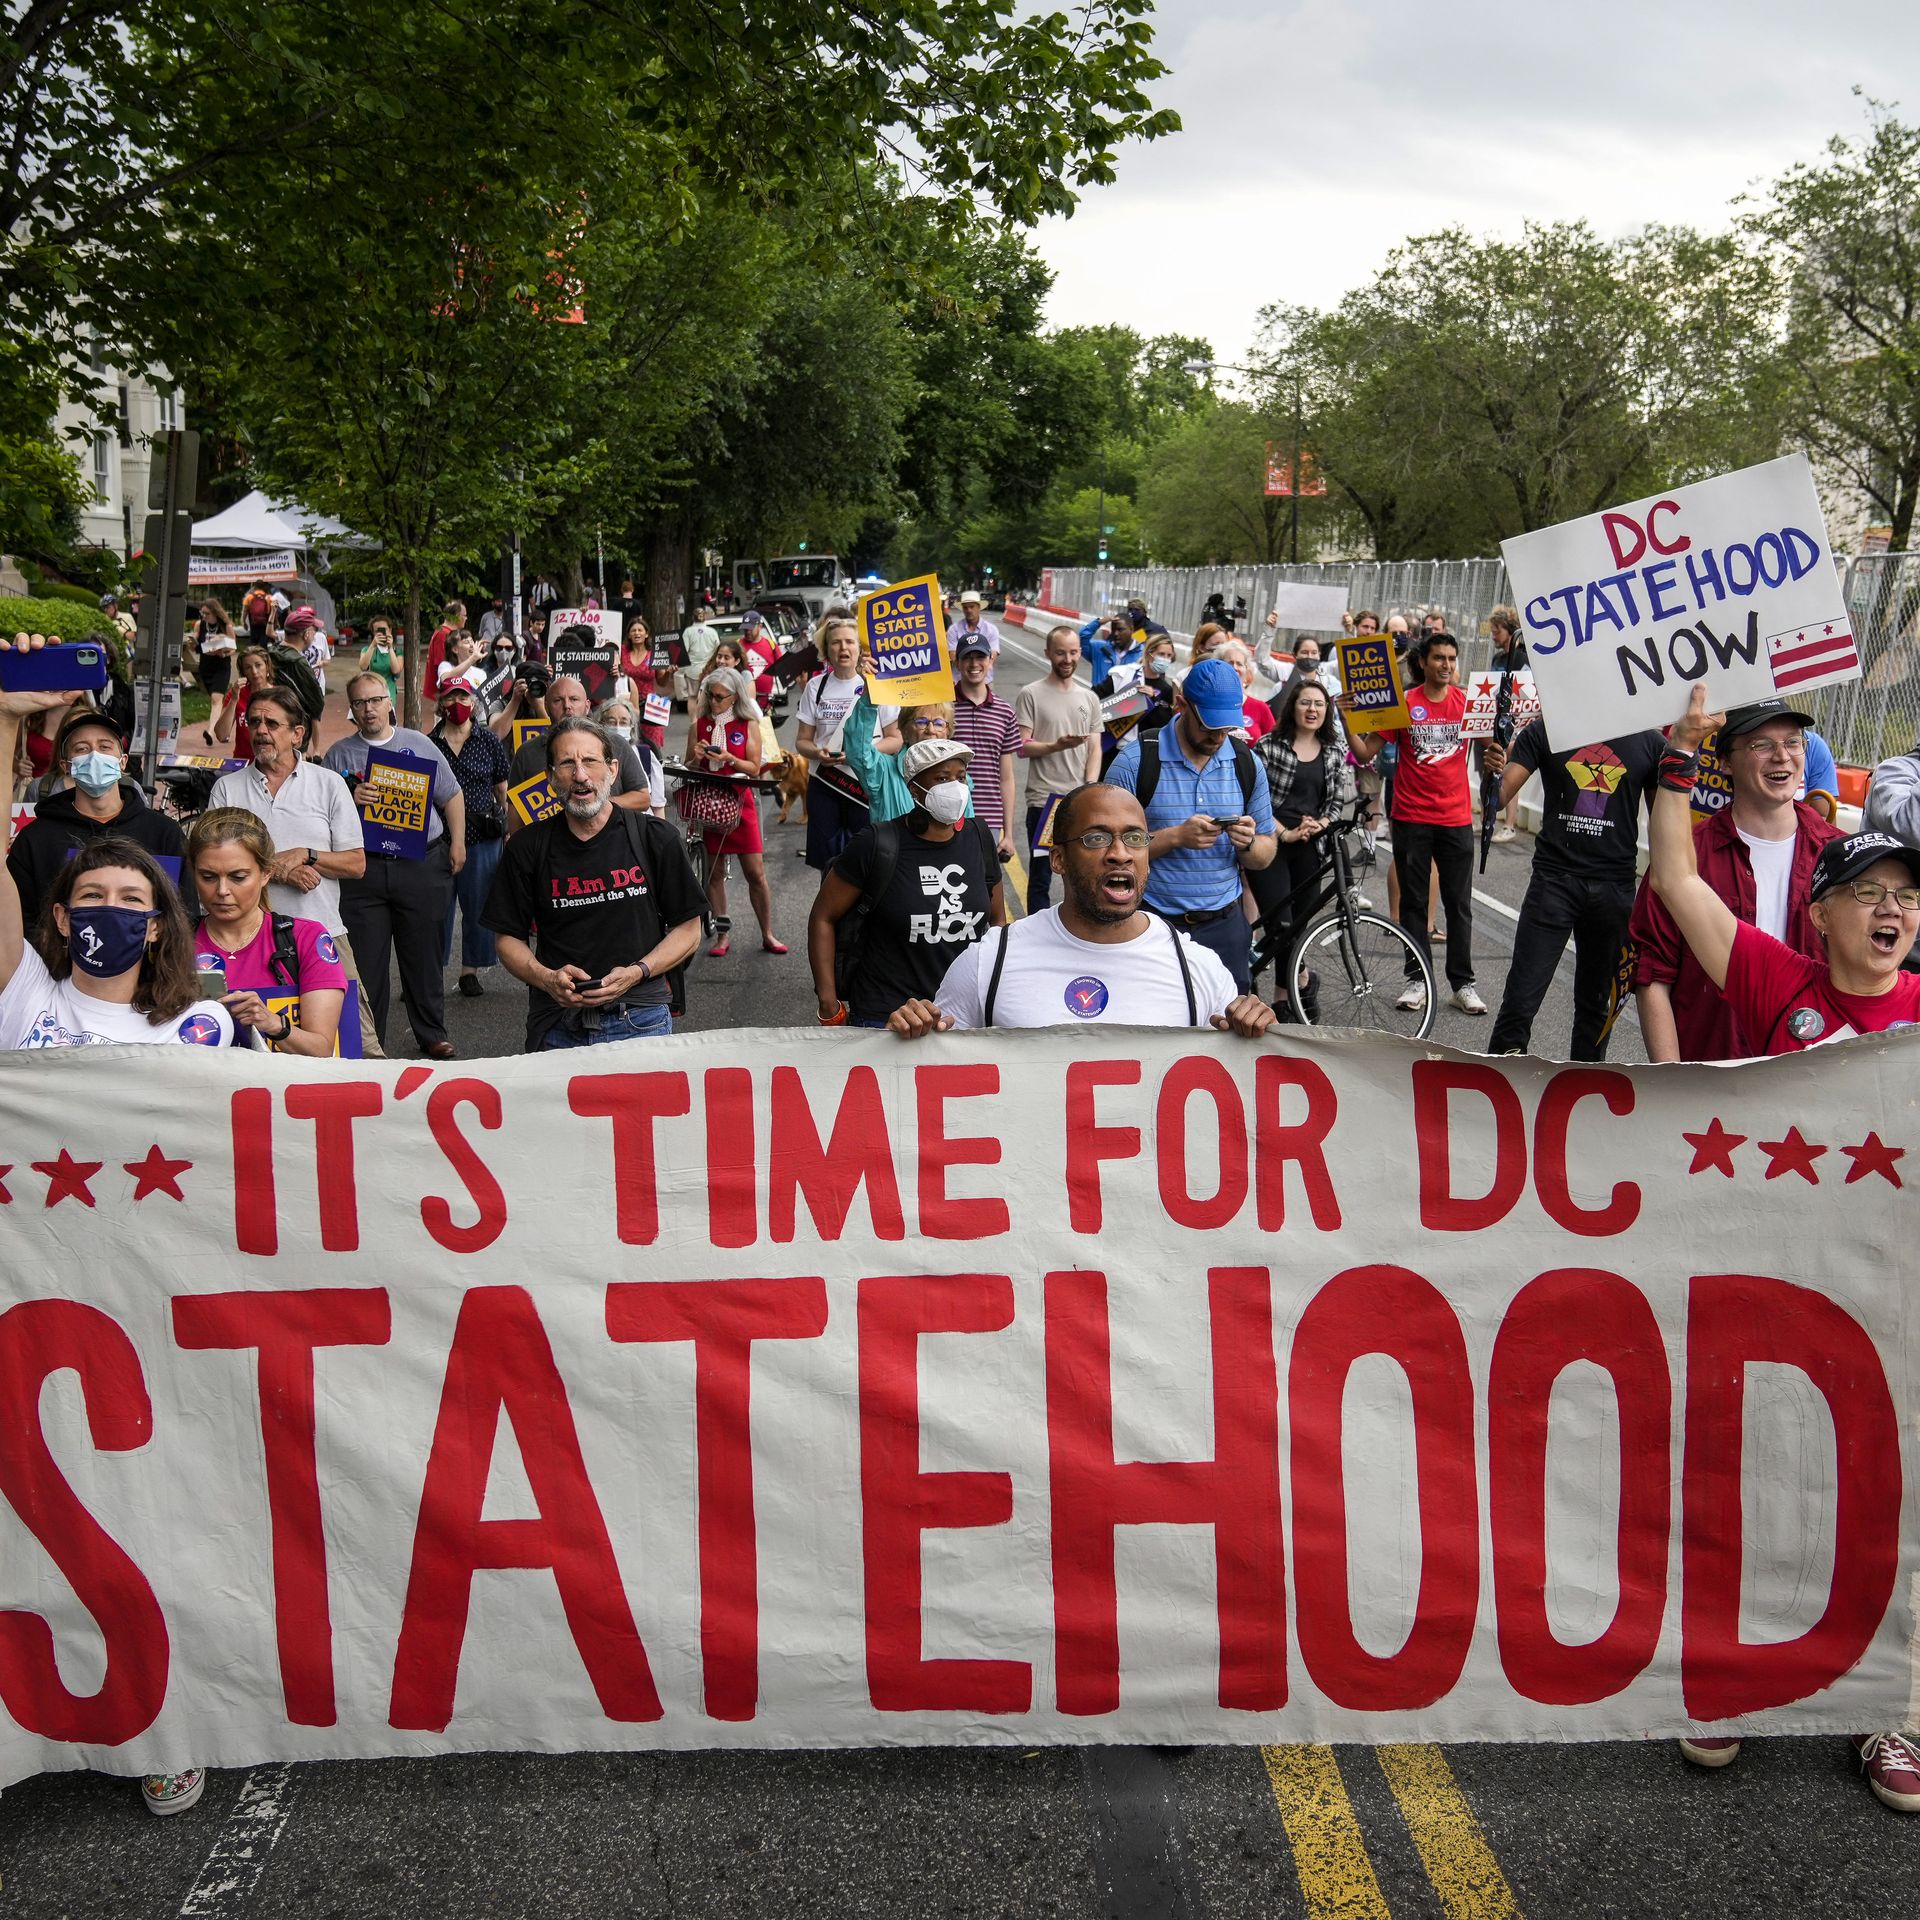 A group of D.C. statehood supporters carry a large banner and march down a street